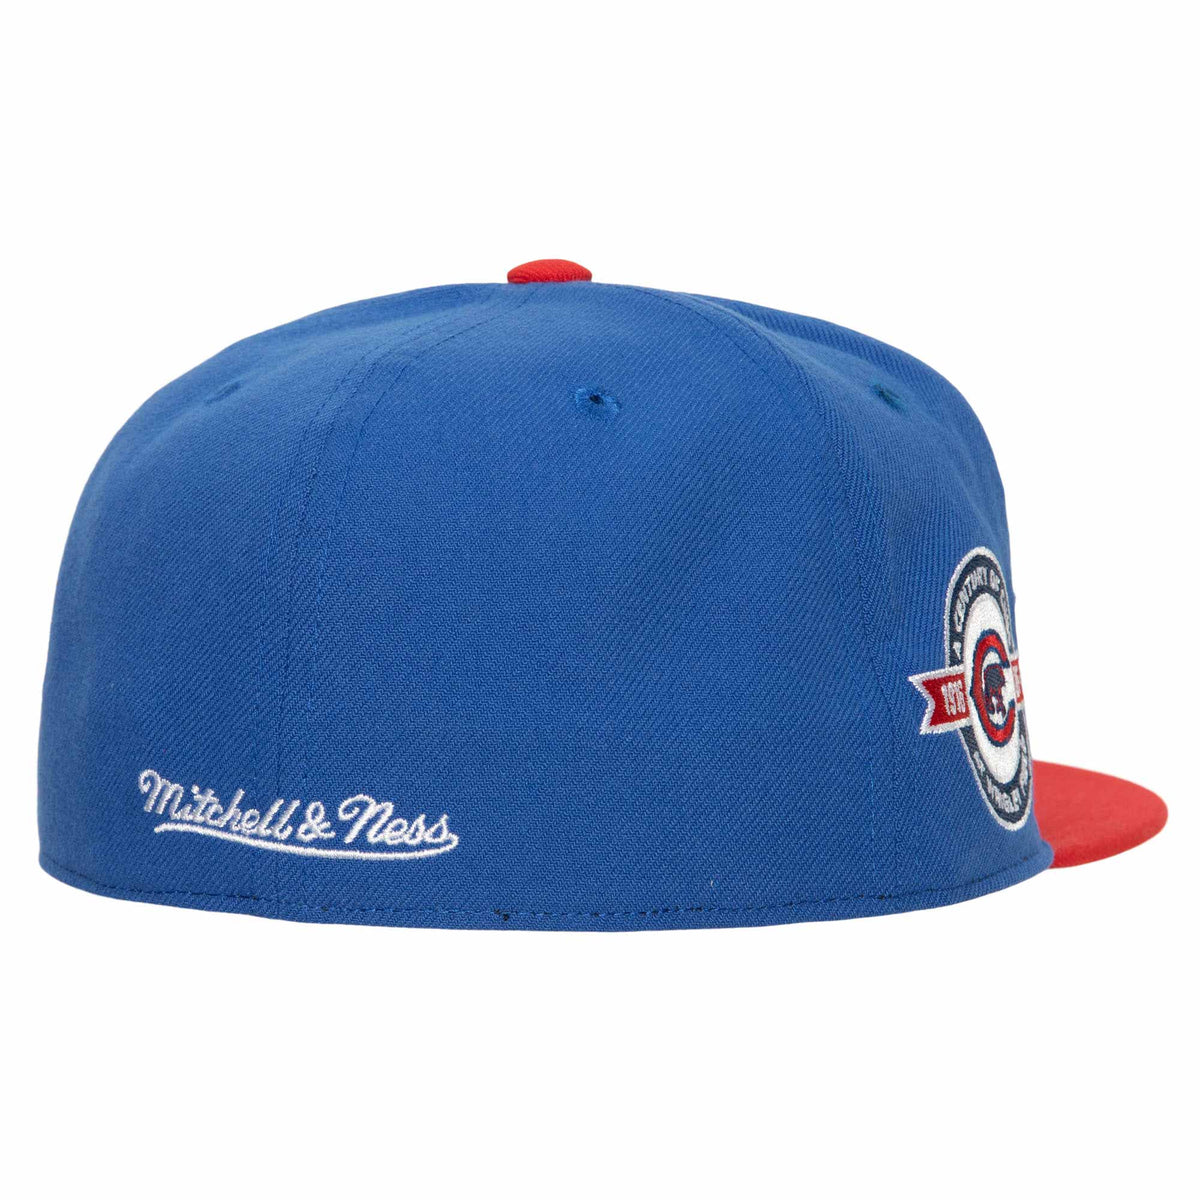 Men's Mitchell & Ness Royal/Red Chicago Cubs Bases Loaded Fitted Hat